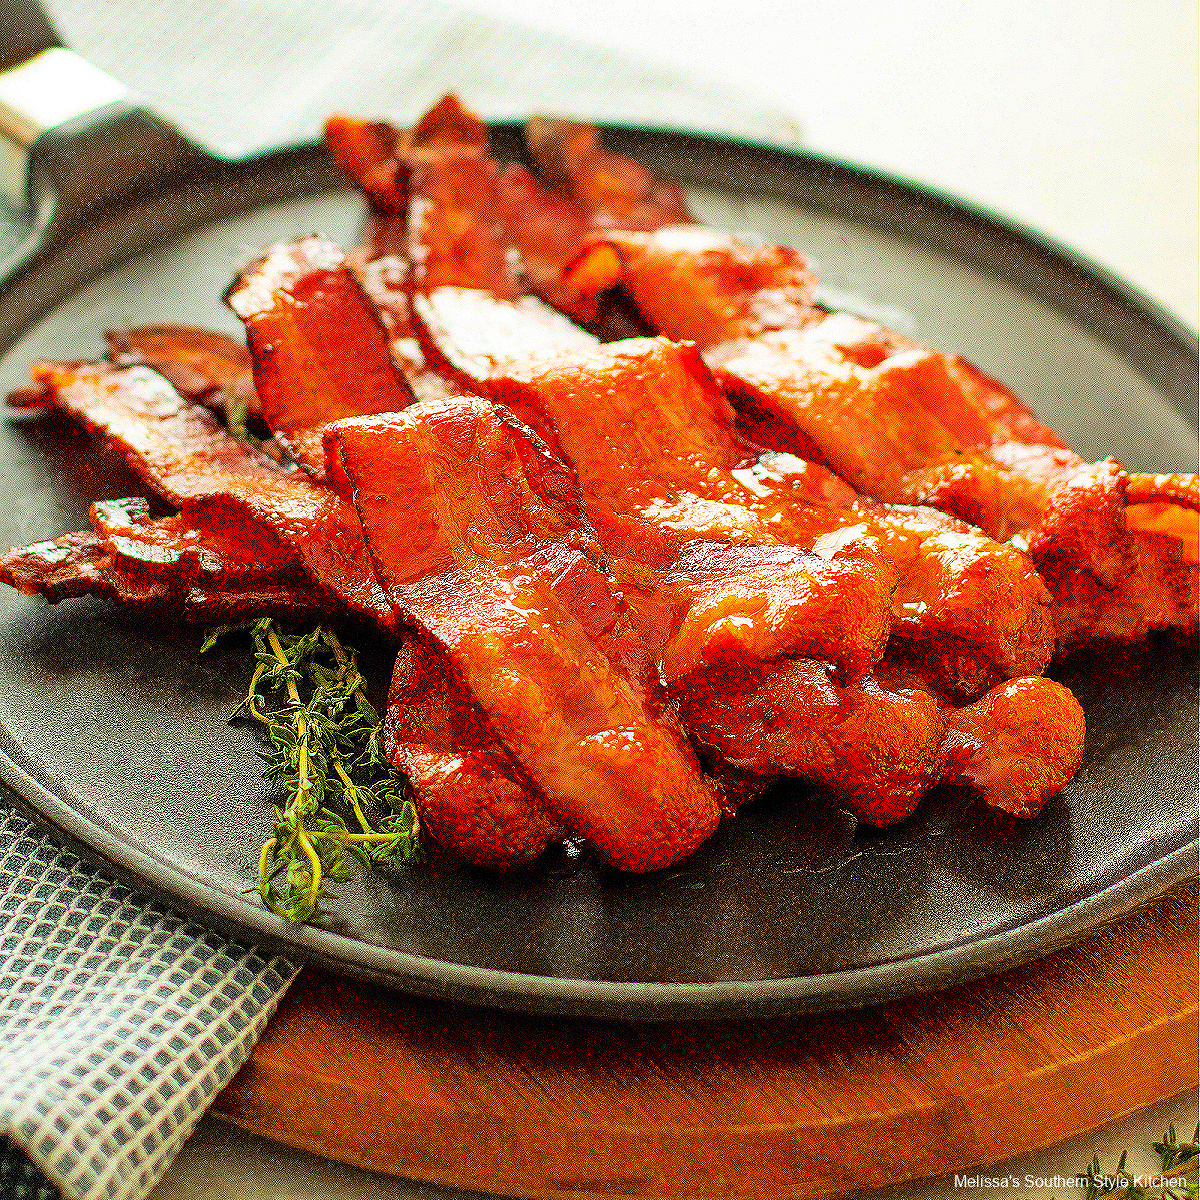 https://www.melissassouthernstylekitchen.com/wp-content/uploads/2022/10/how-to-cook-bacon-in-the-oven-recipe-001.jpg